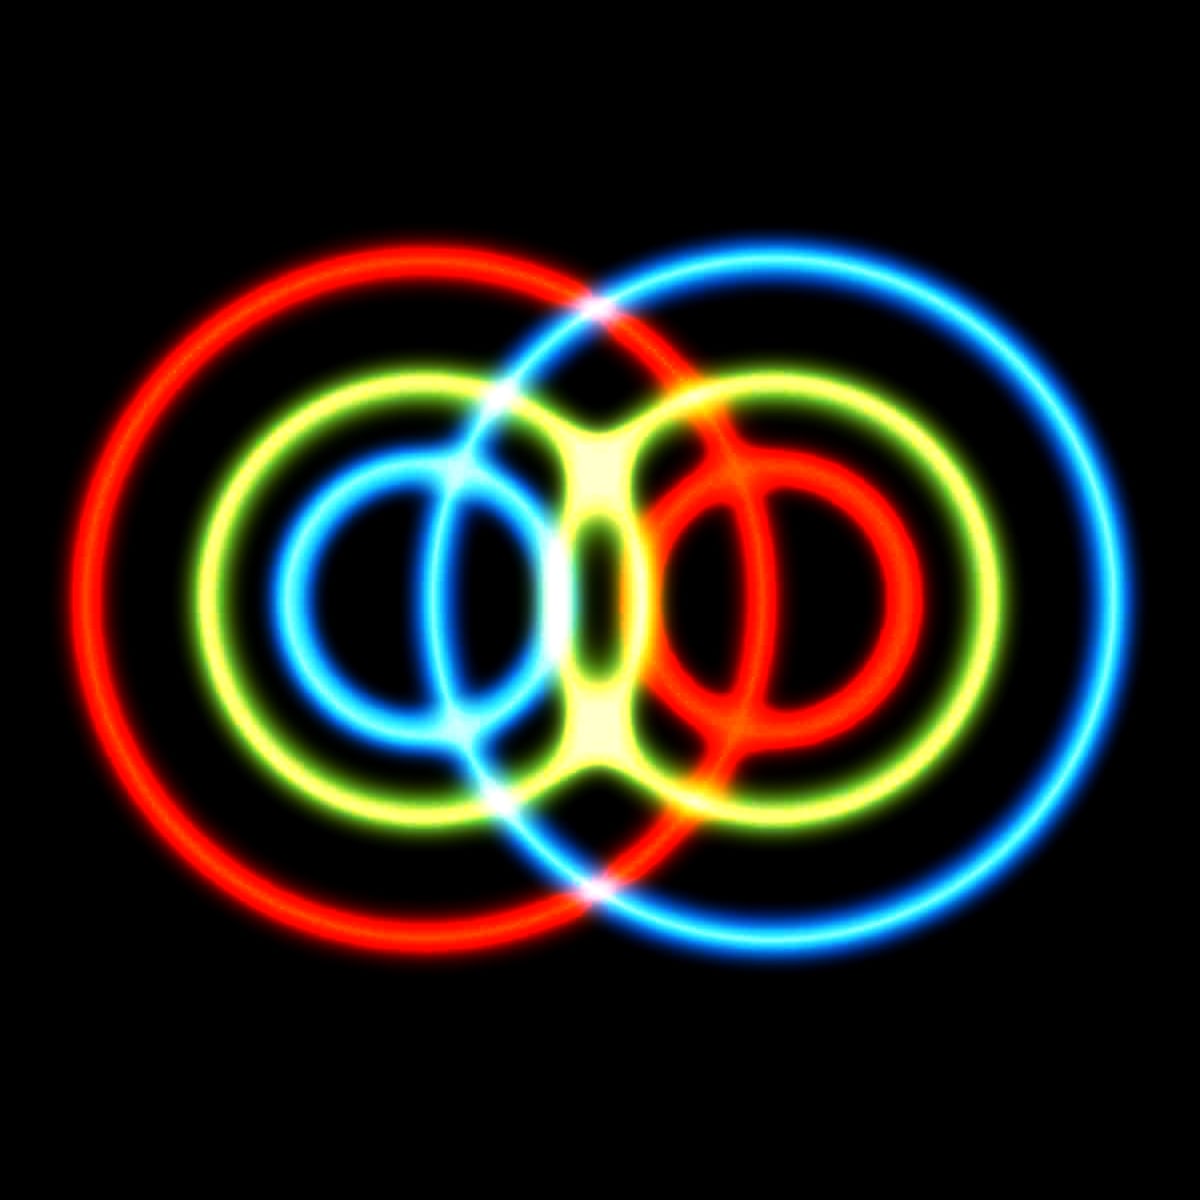 A scientific representation of quantum entanglement, showing two sets of concentric rings interfering with each other, in yellows, blues and reds on a black background.